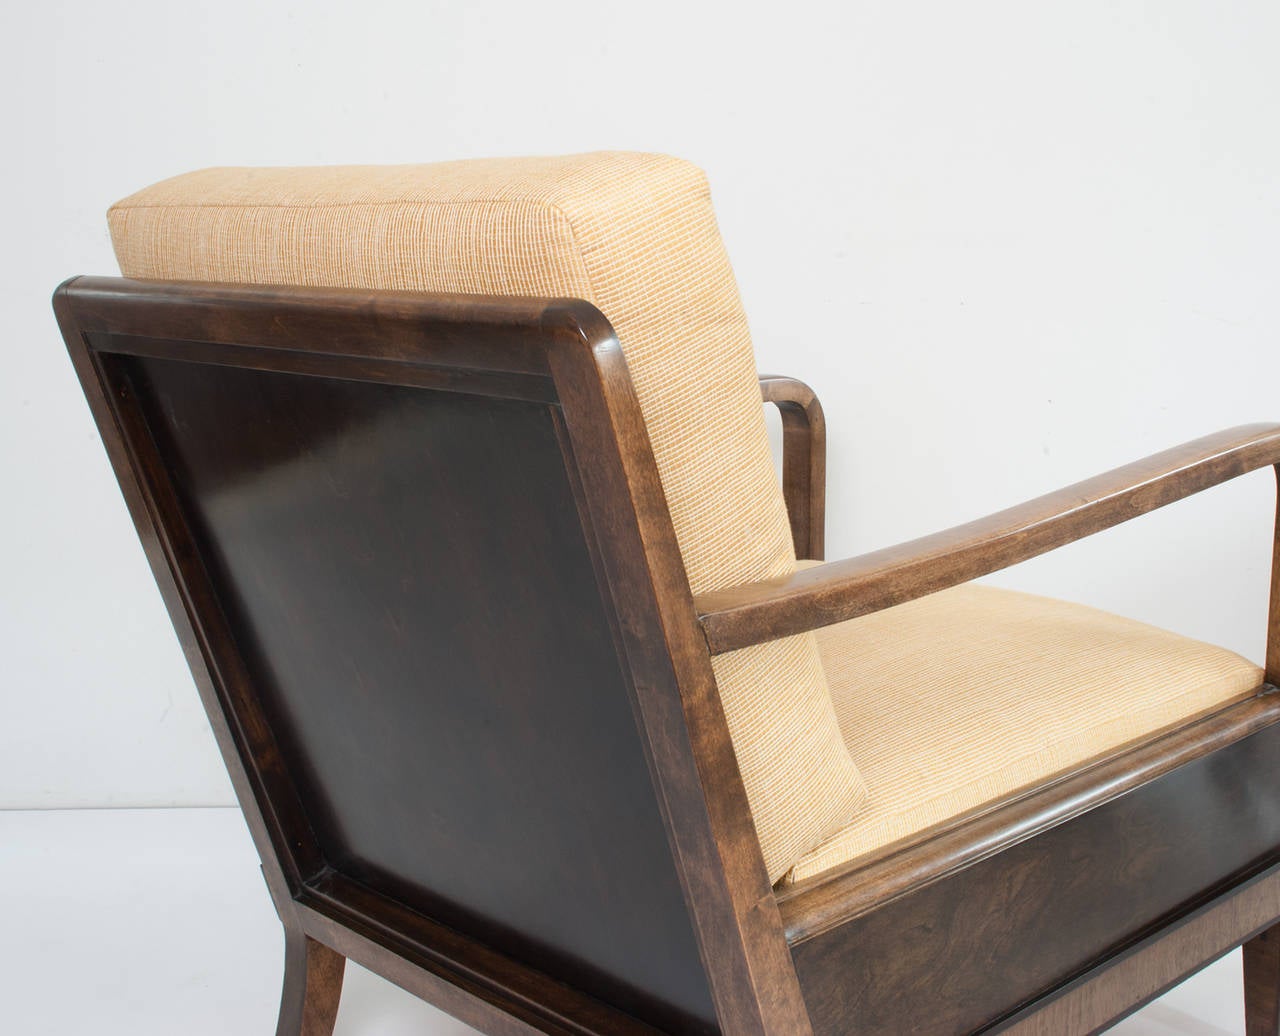 20th Century Pair of Swedish art deco armchairs in stained birch and mahogany inlay.